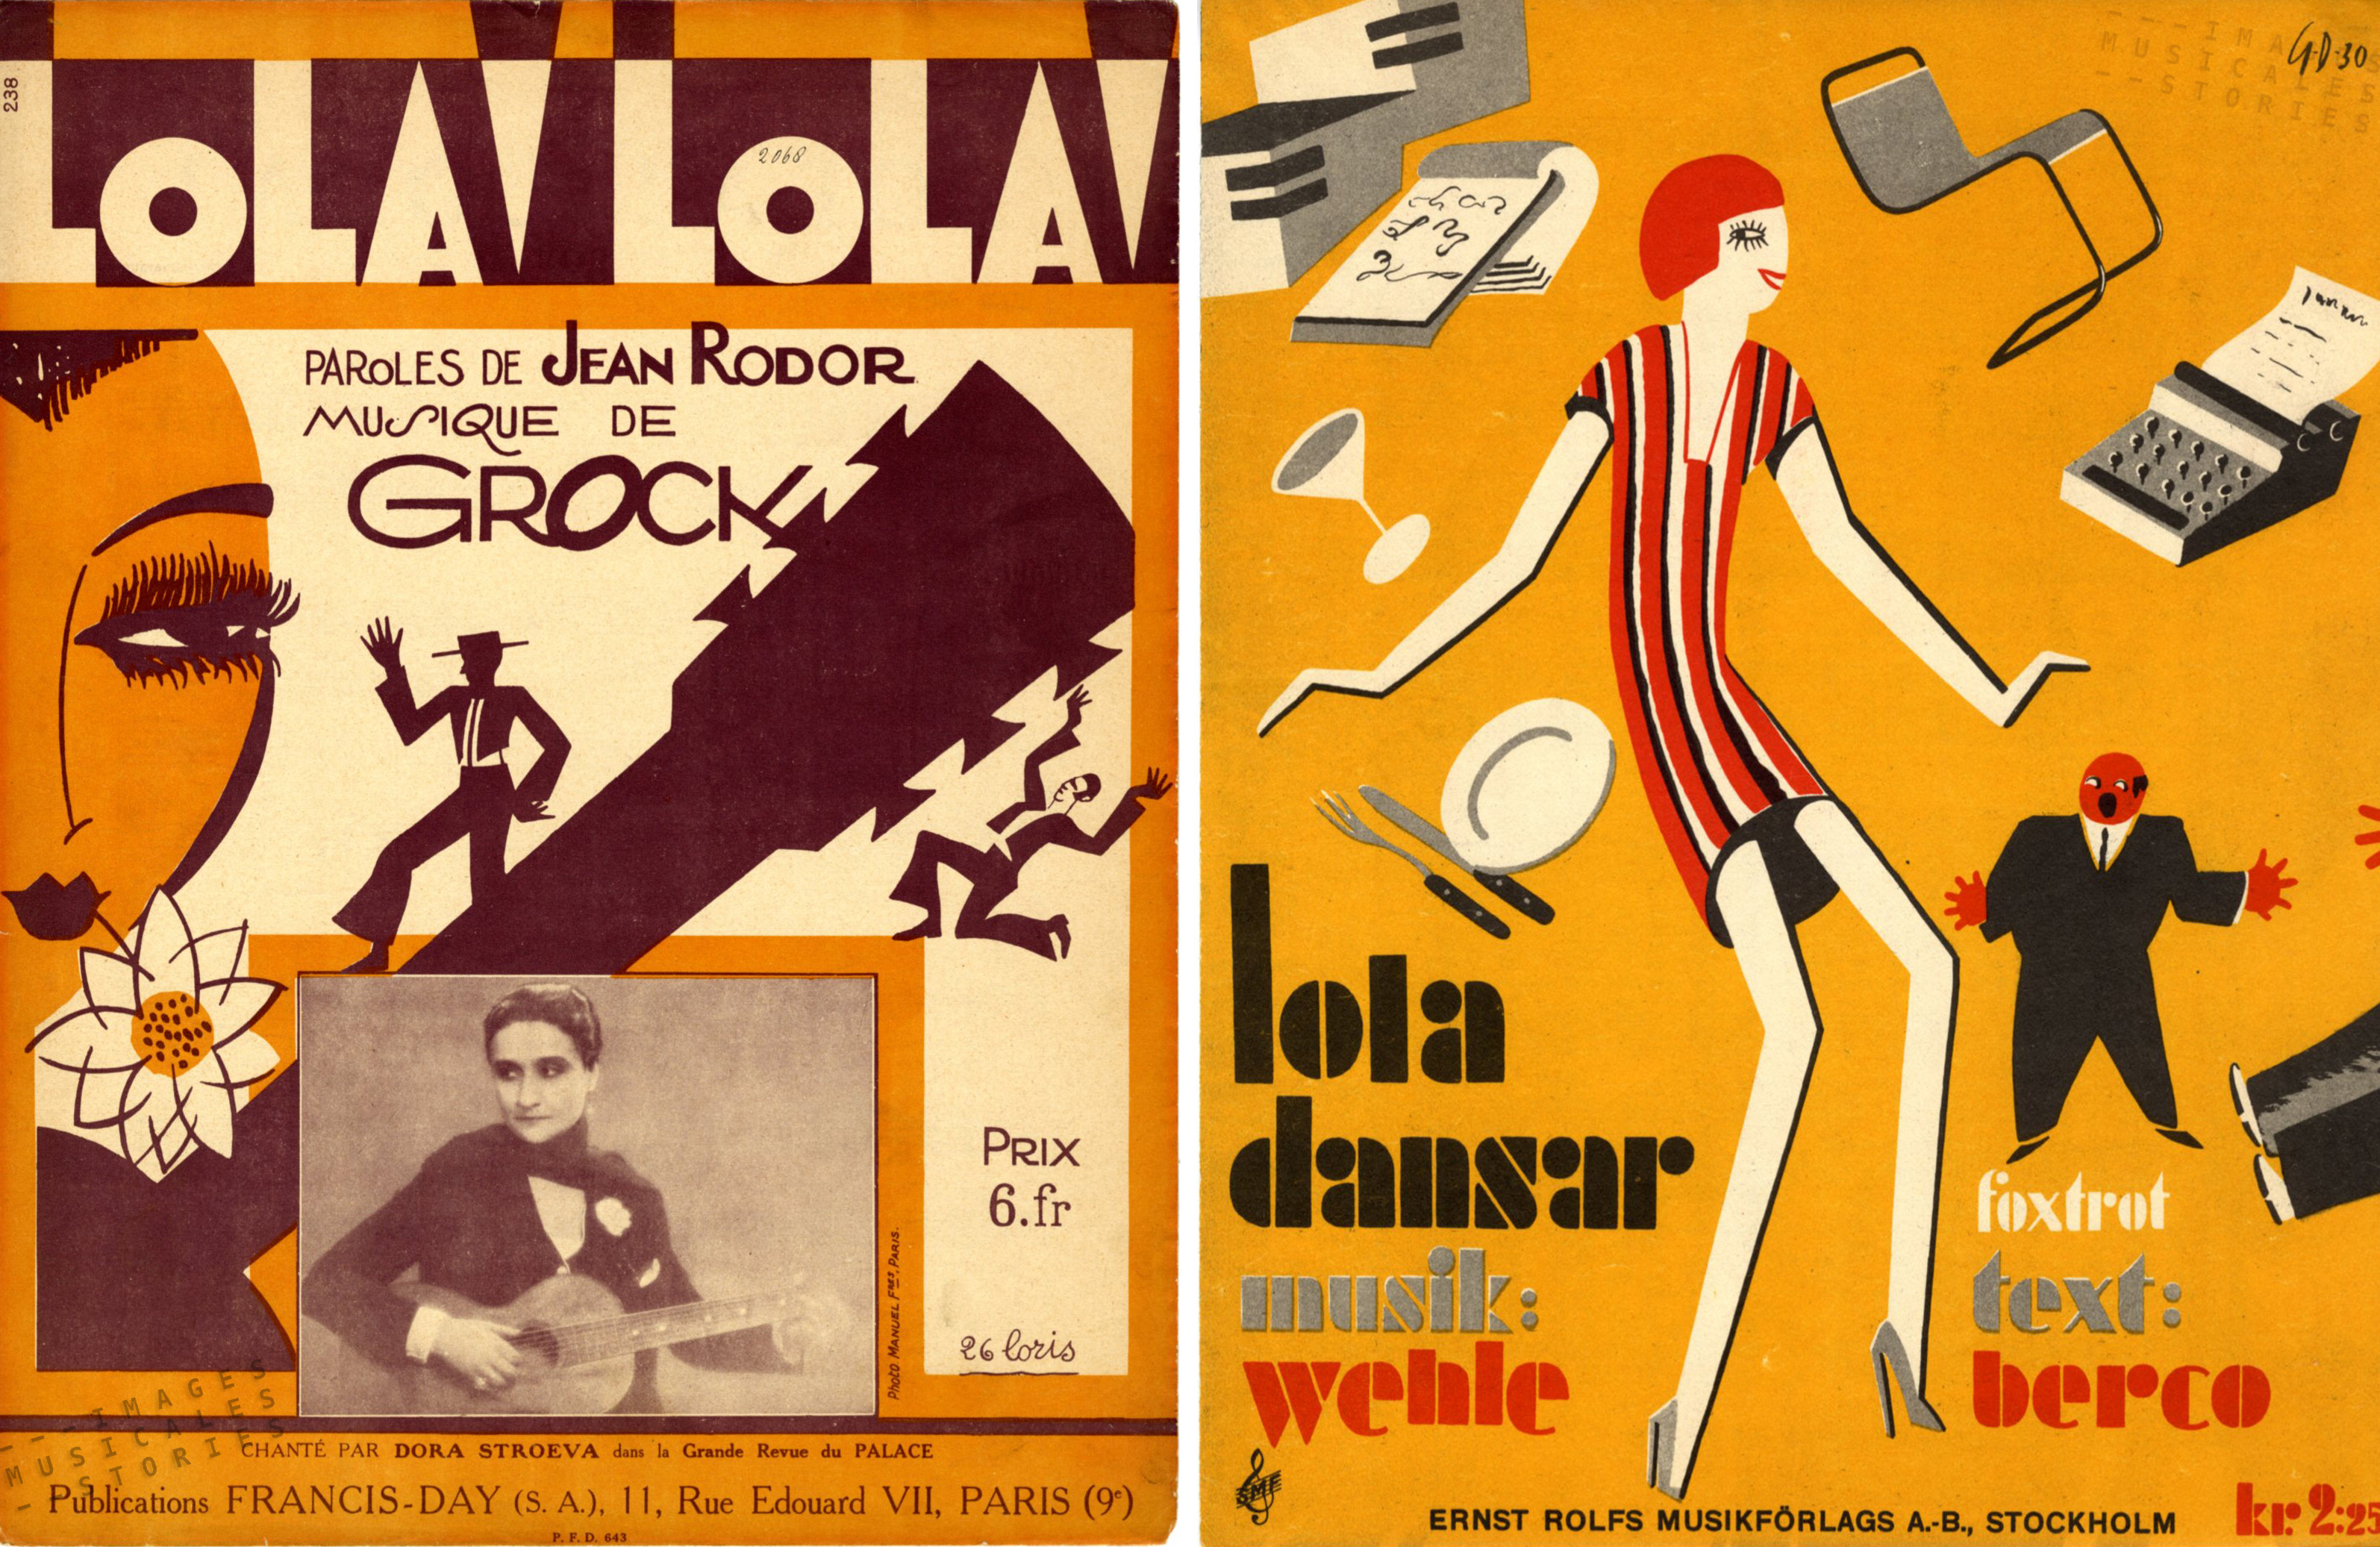 Lola (first name) sheet music covers on images musicales.be website